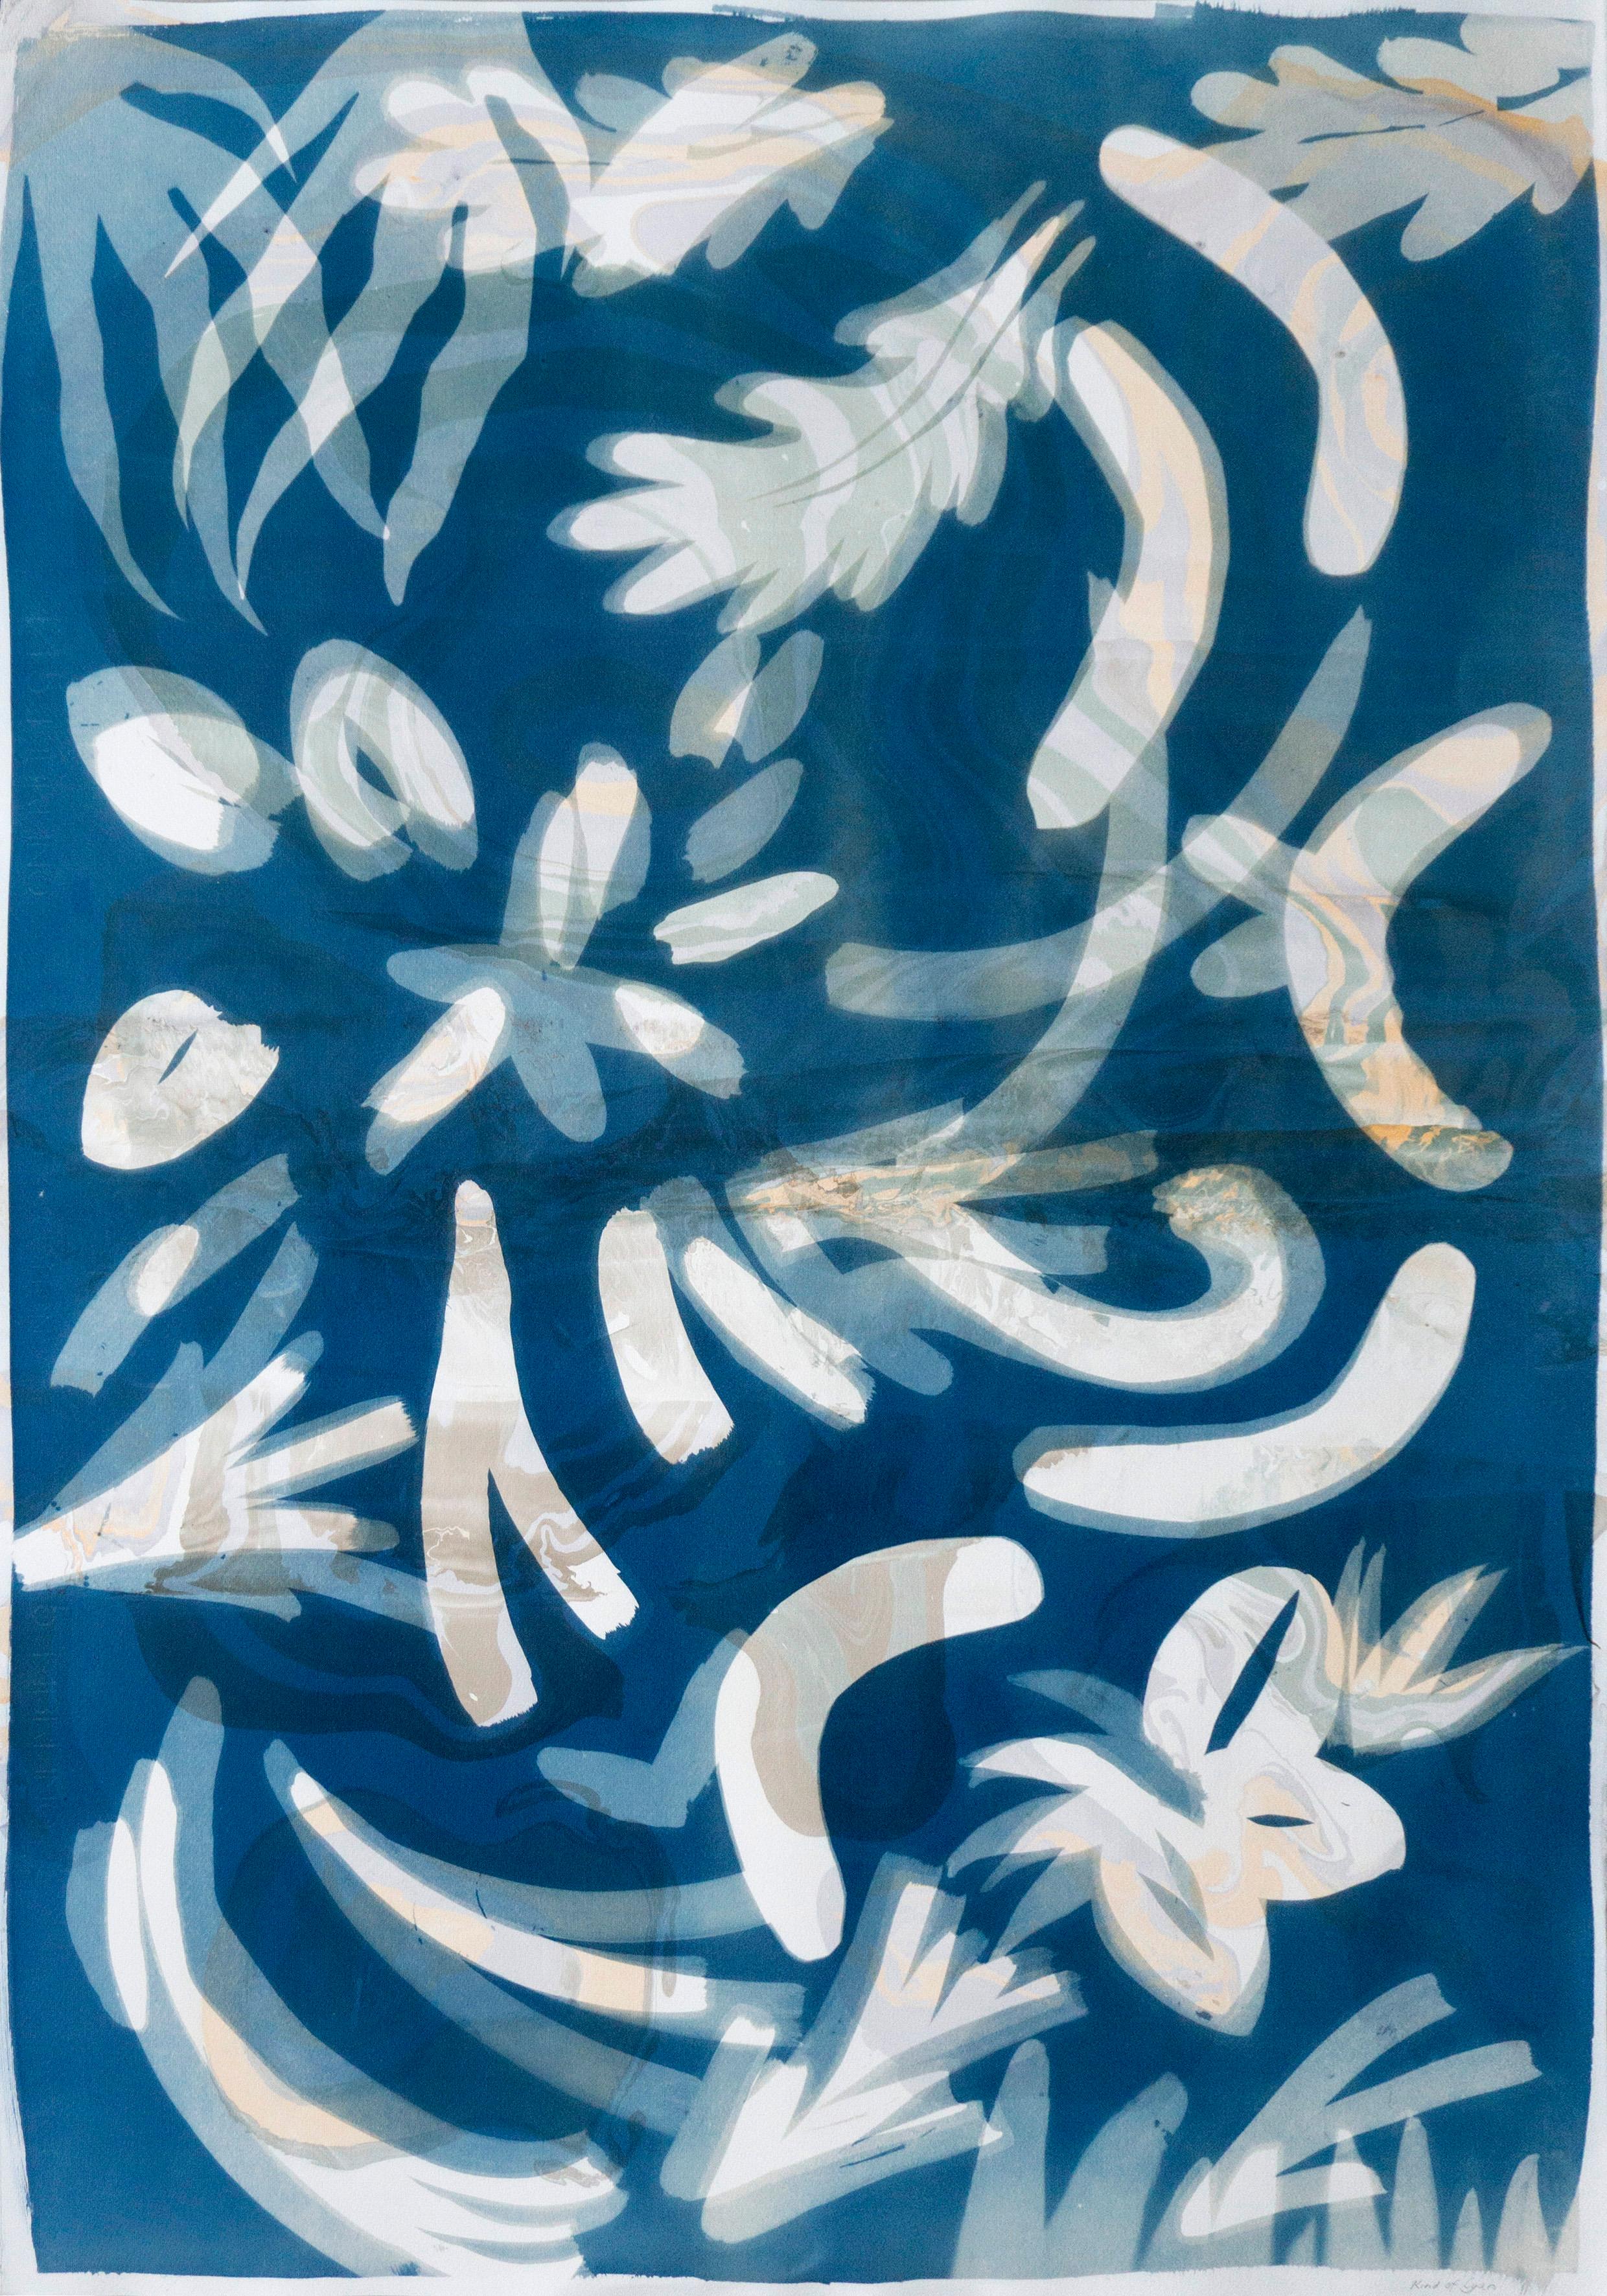 Botanical Cyanotype of Floating Floral Forms, Unique Monotype, Classy Marbling 